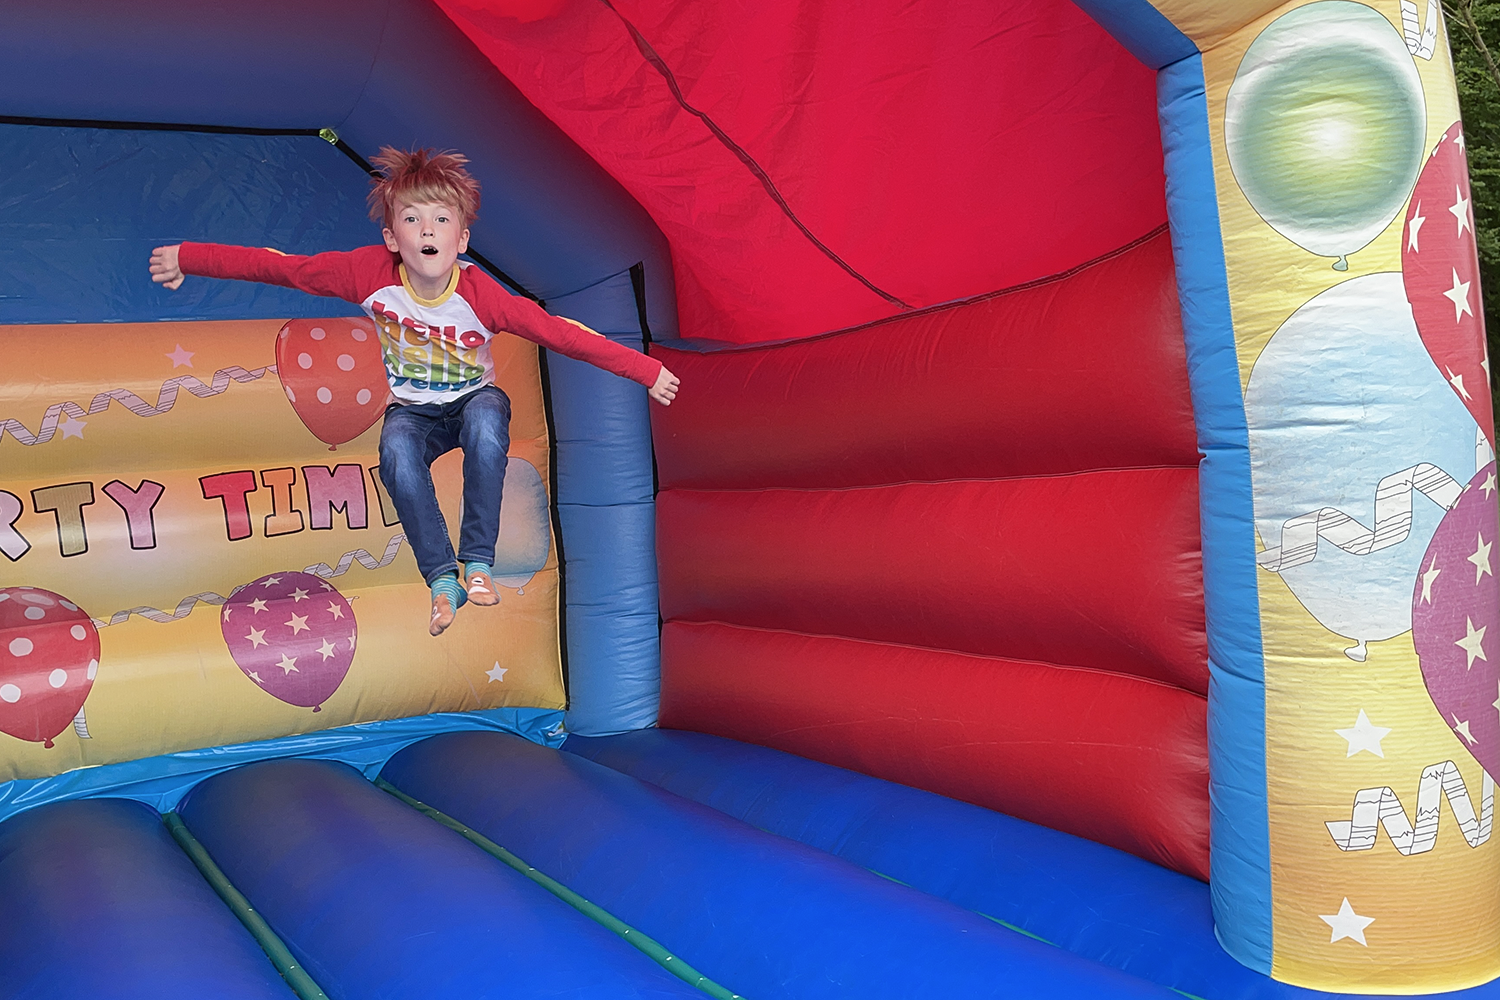 Gabe doing a massive jump on a blue and red bouncy castle.